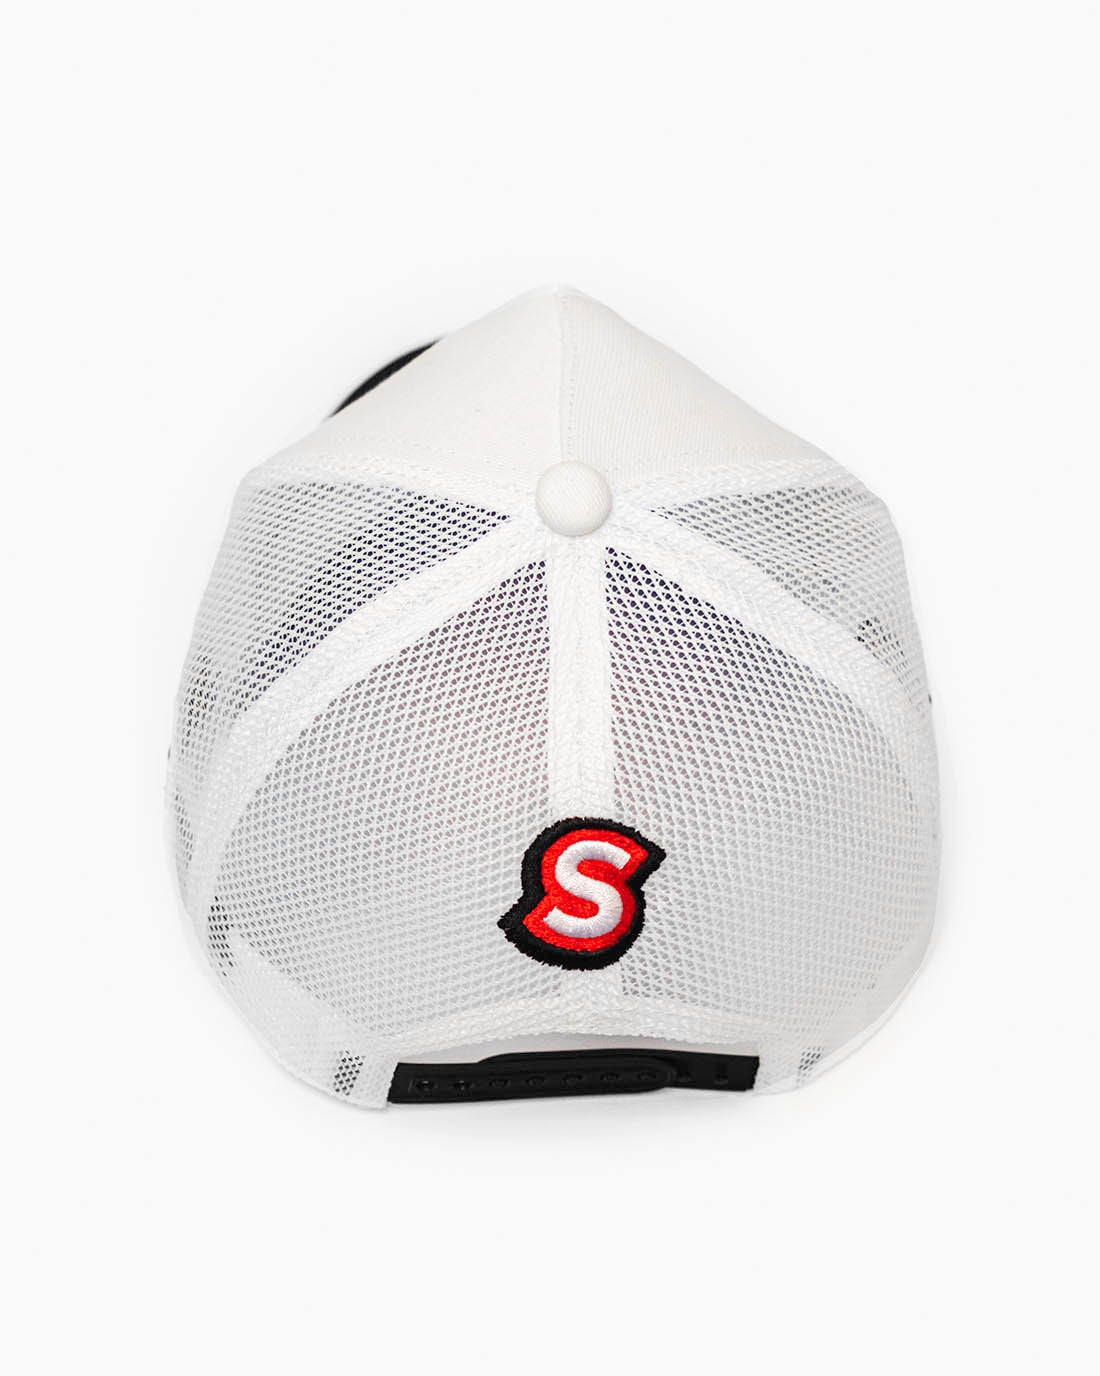 Rear side view of a two-tone black and white snapback hat with trendy racing-inspired embroidered design and cooling mesh back.